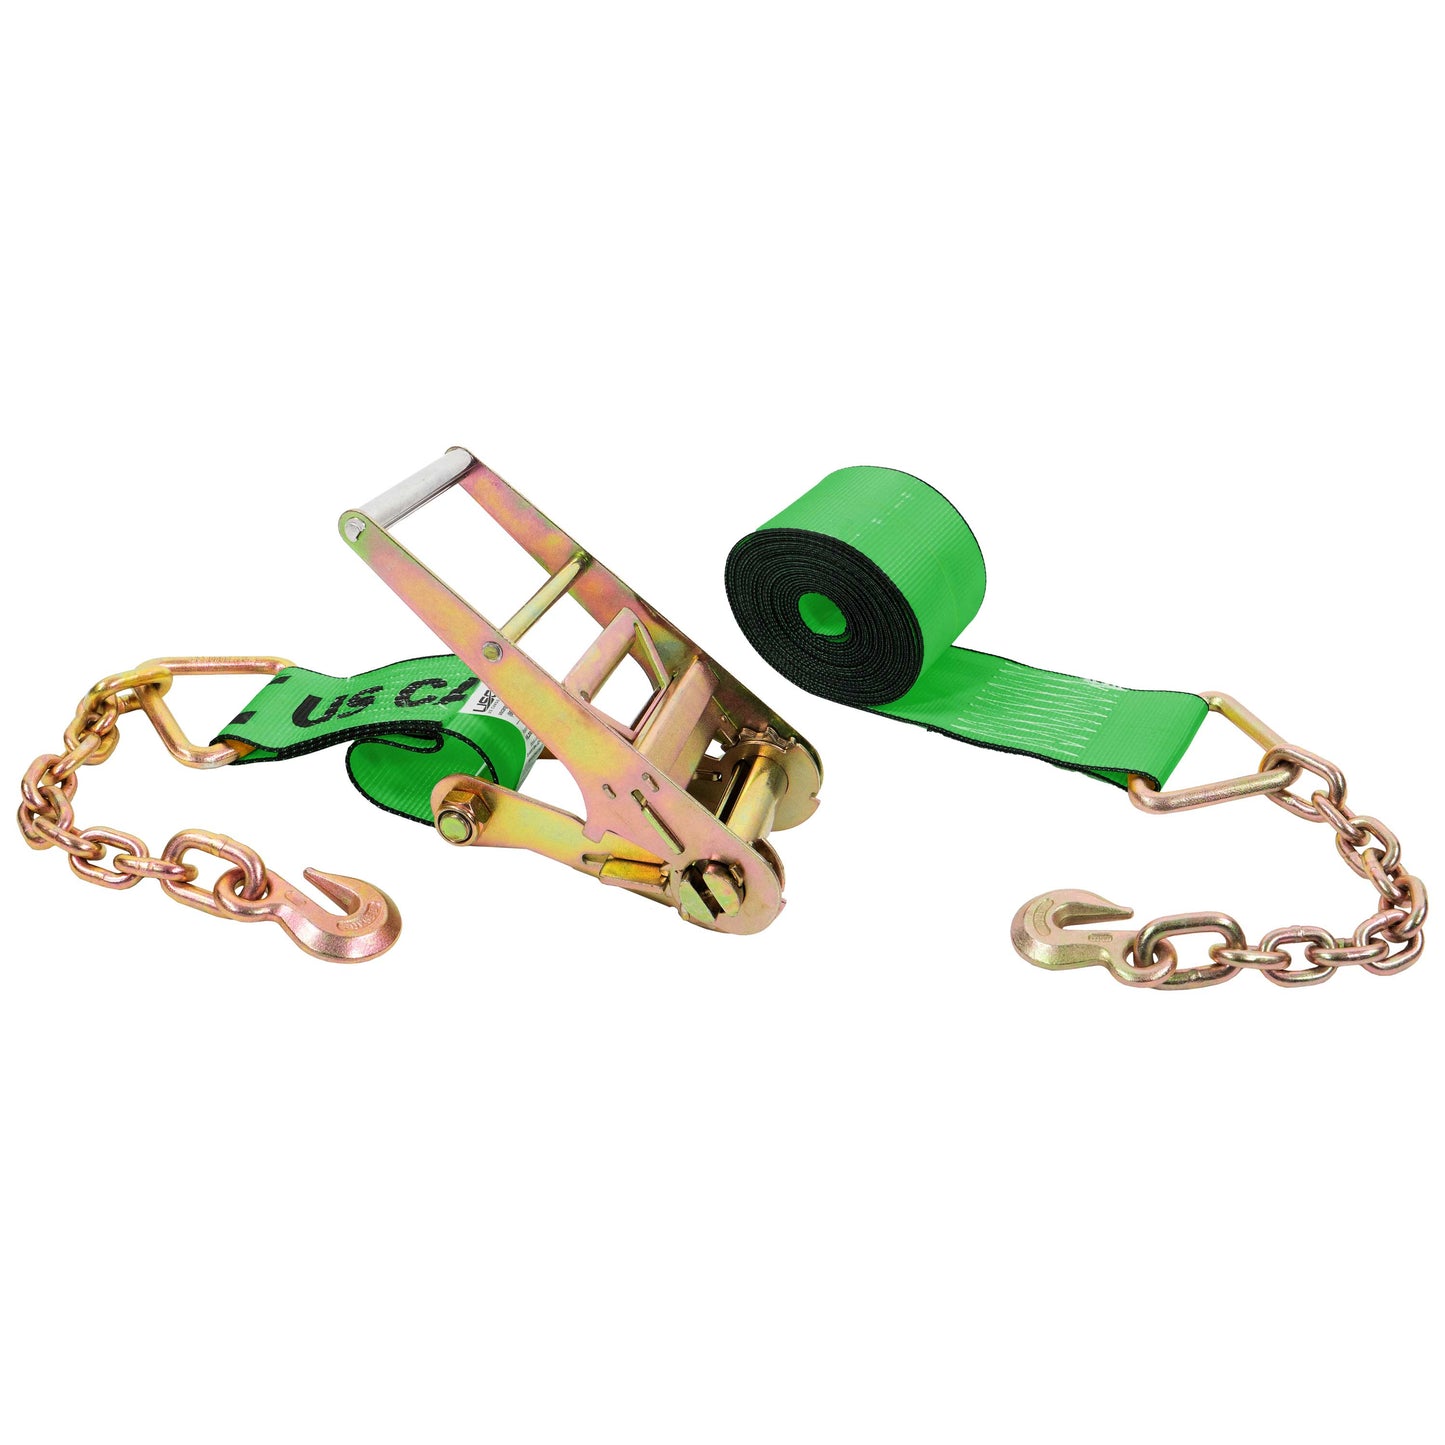 20' 4" heavy-duty green chain extension ratchet strap